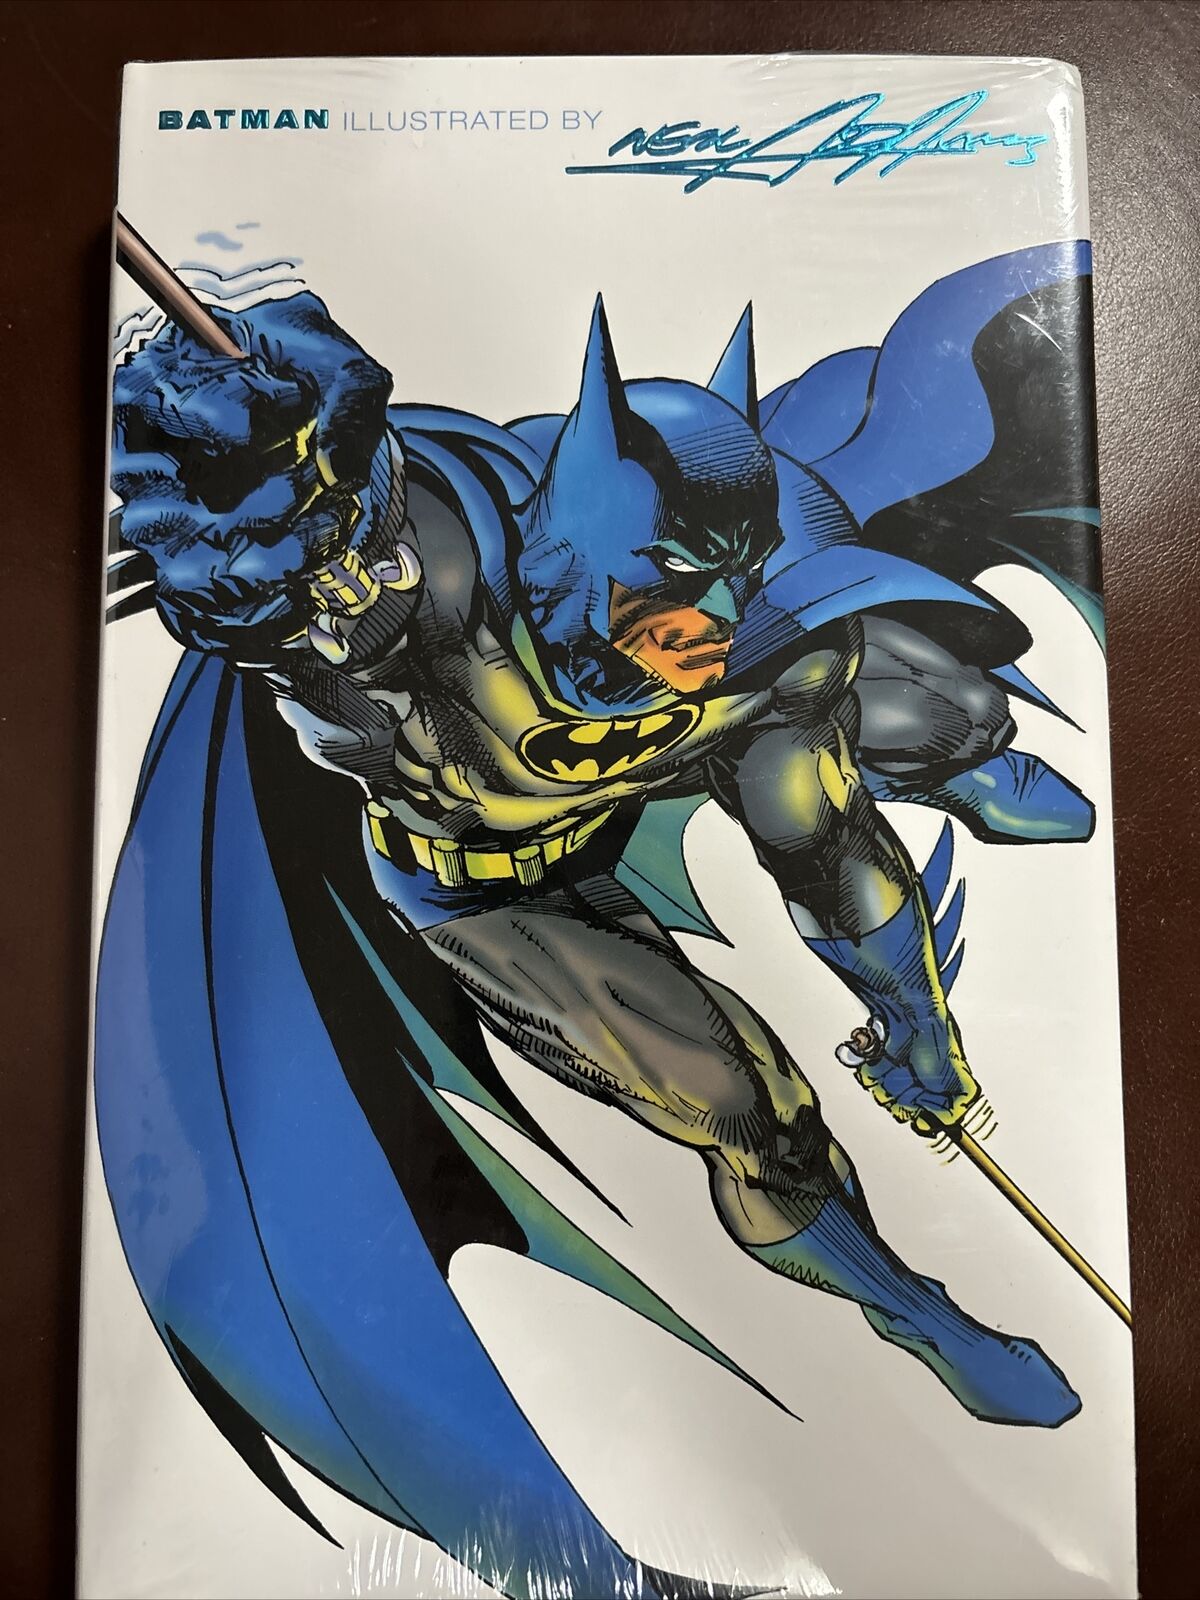 NEW SEALED Batman Illustrated By NEAL ADAMS VOL. 2 HARDCOVER - DC COMICS 2004